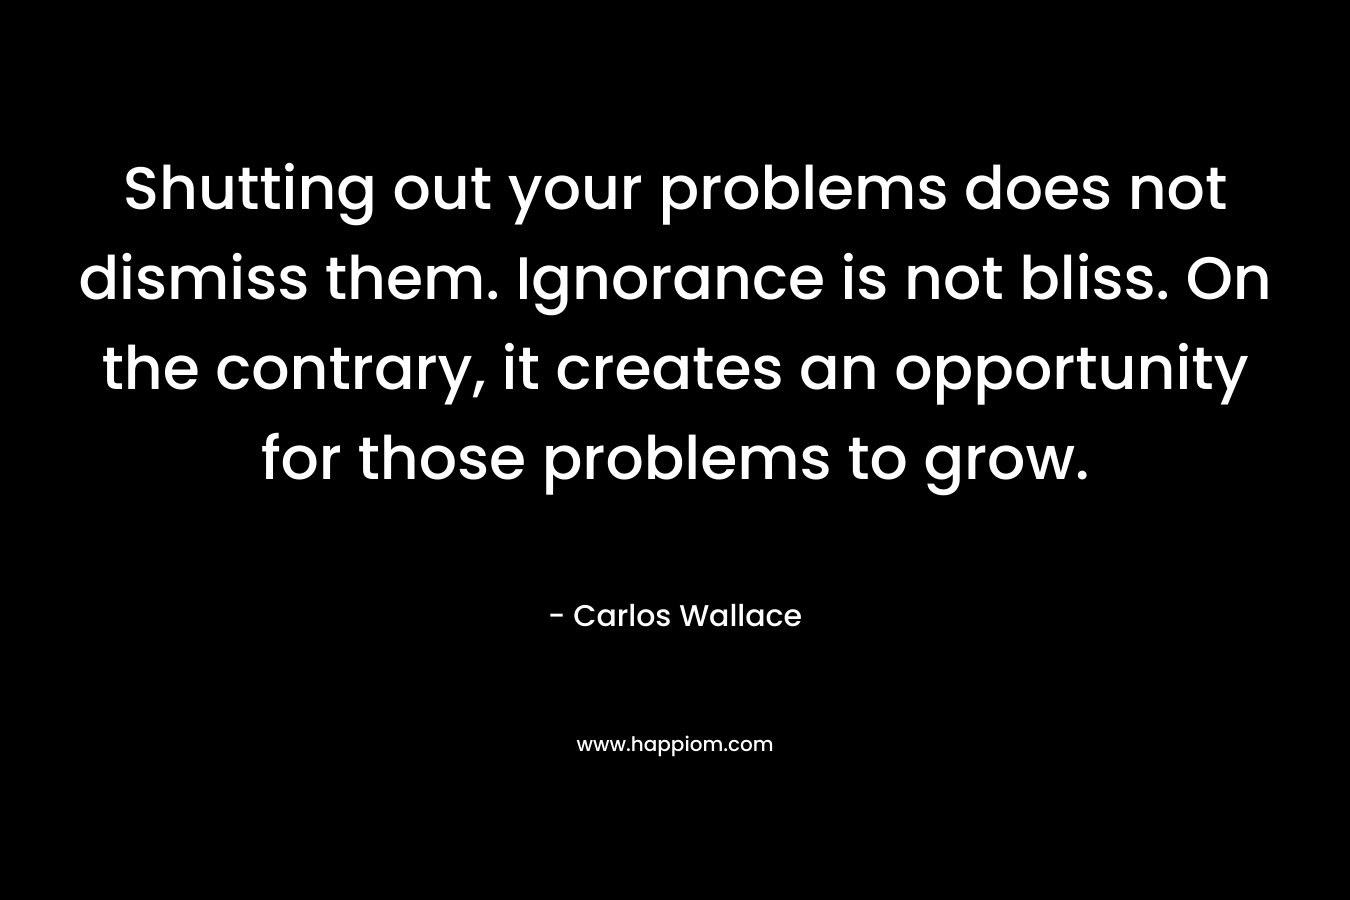 Shutting out your problems does not dismiss them. Ignorance is not bliss. On the contrary, it creates an opportunity for those problems to grow. – Carlos Wallace